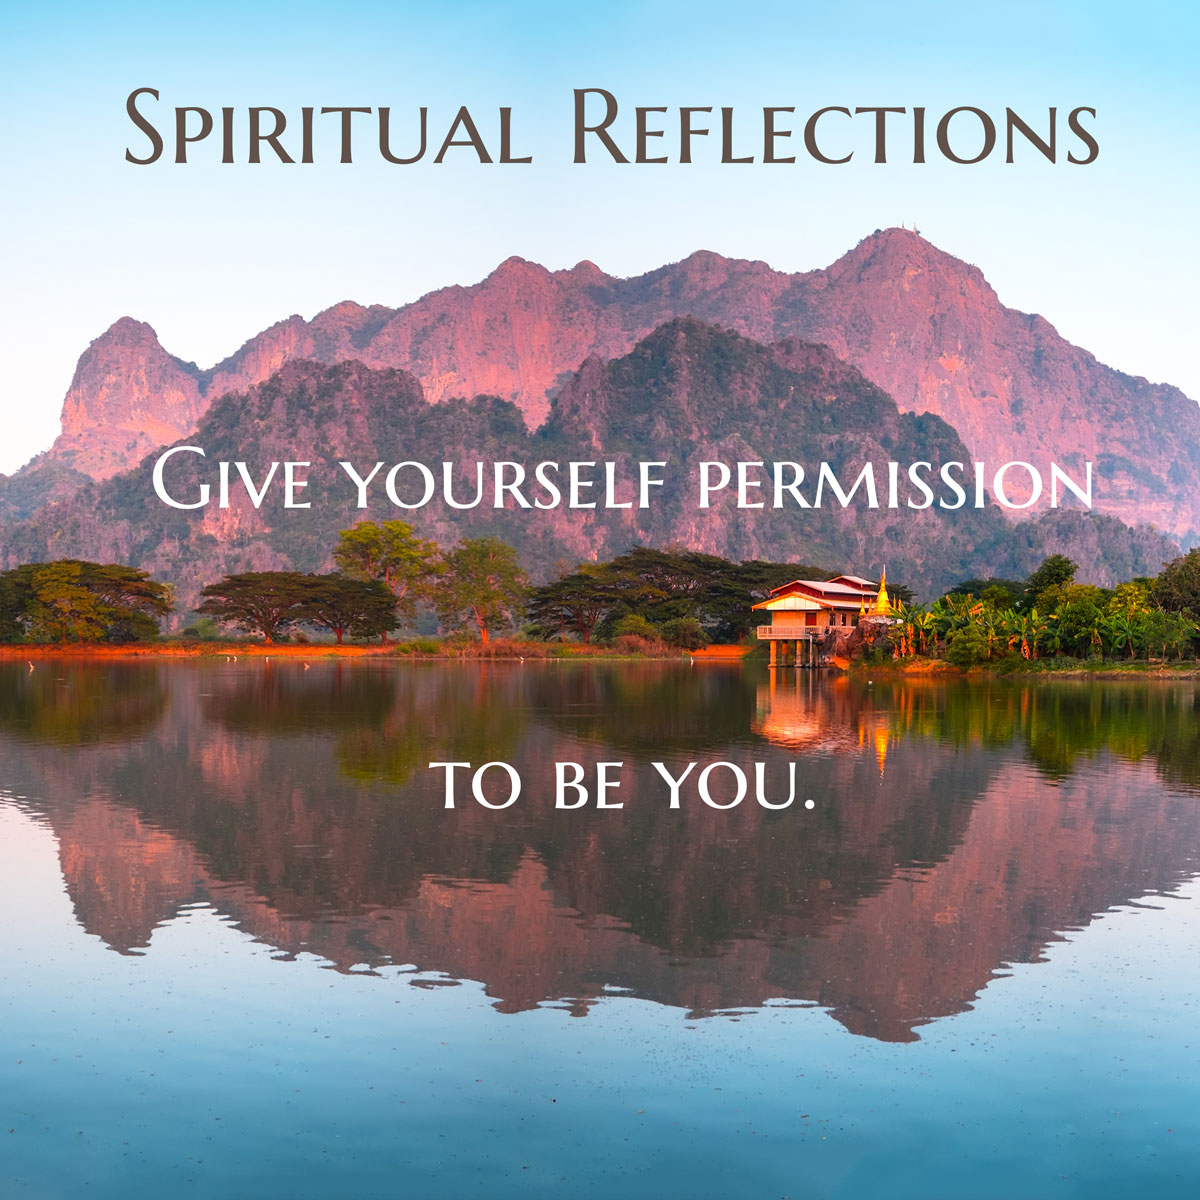 Give yourself permission to be you.